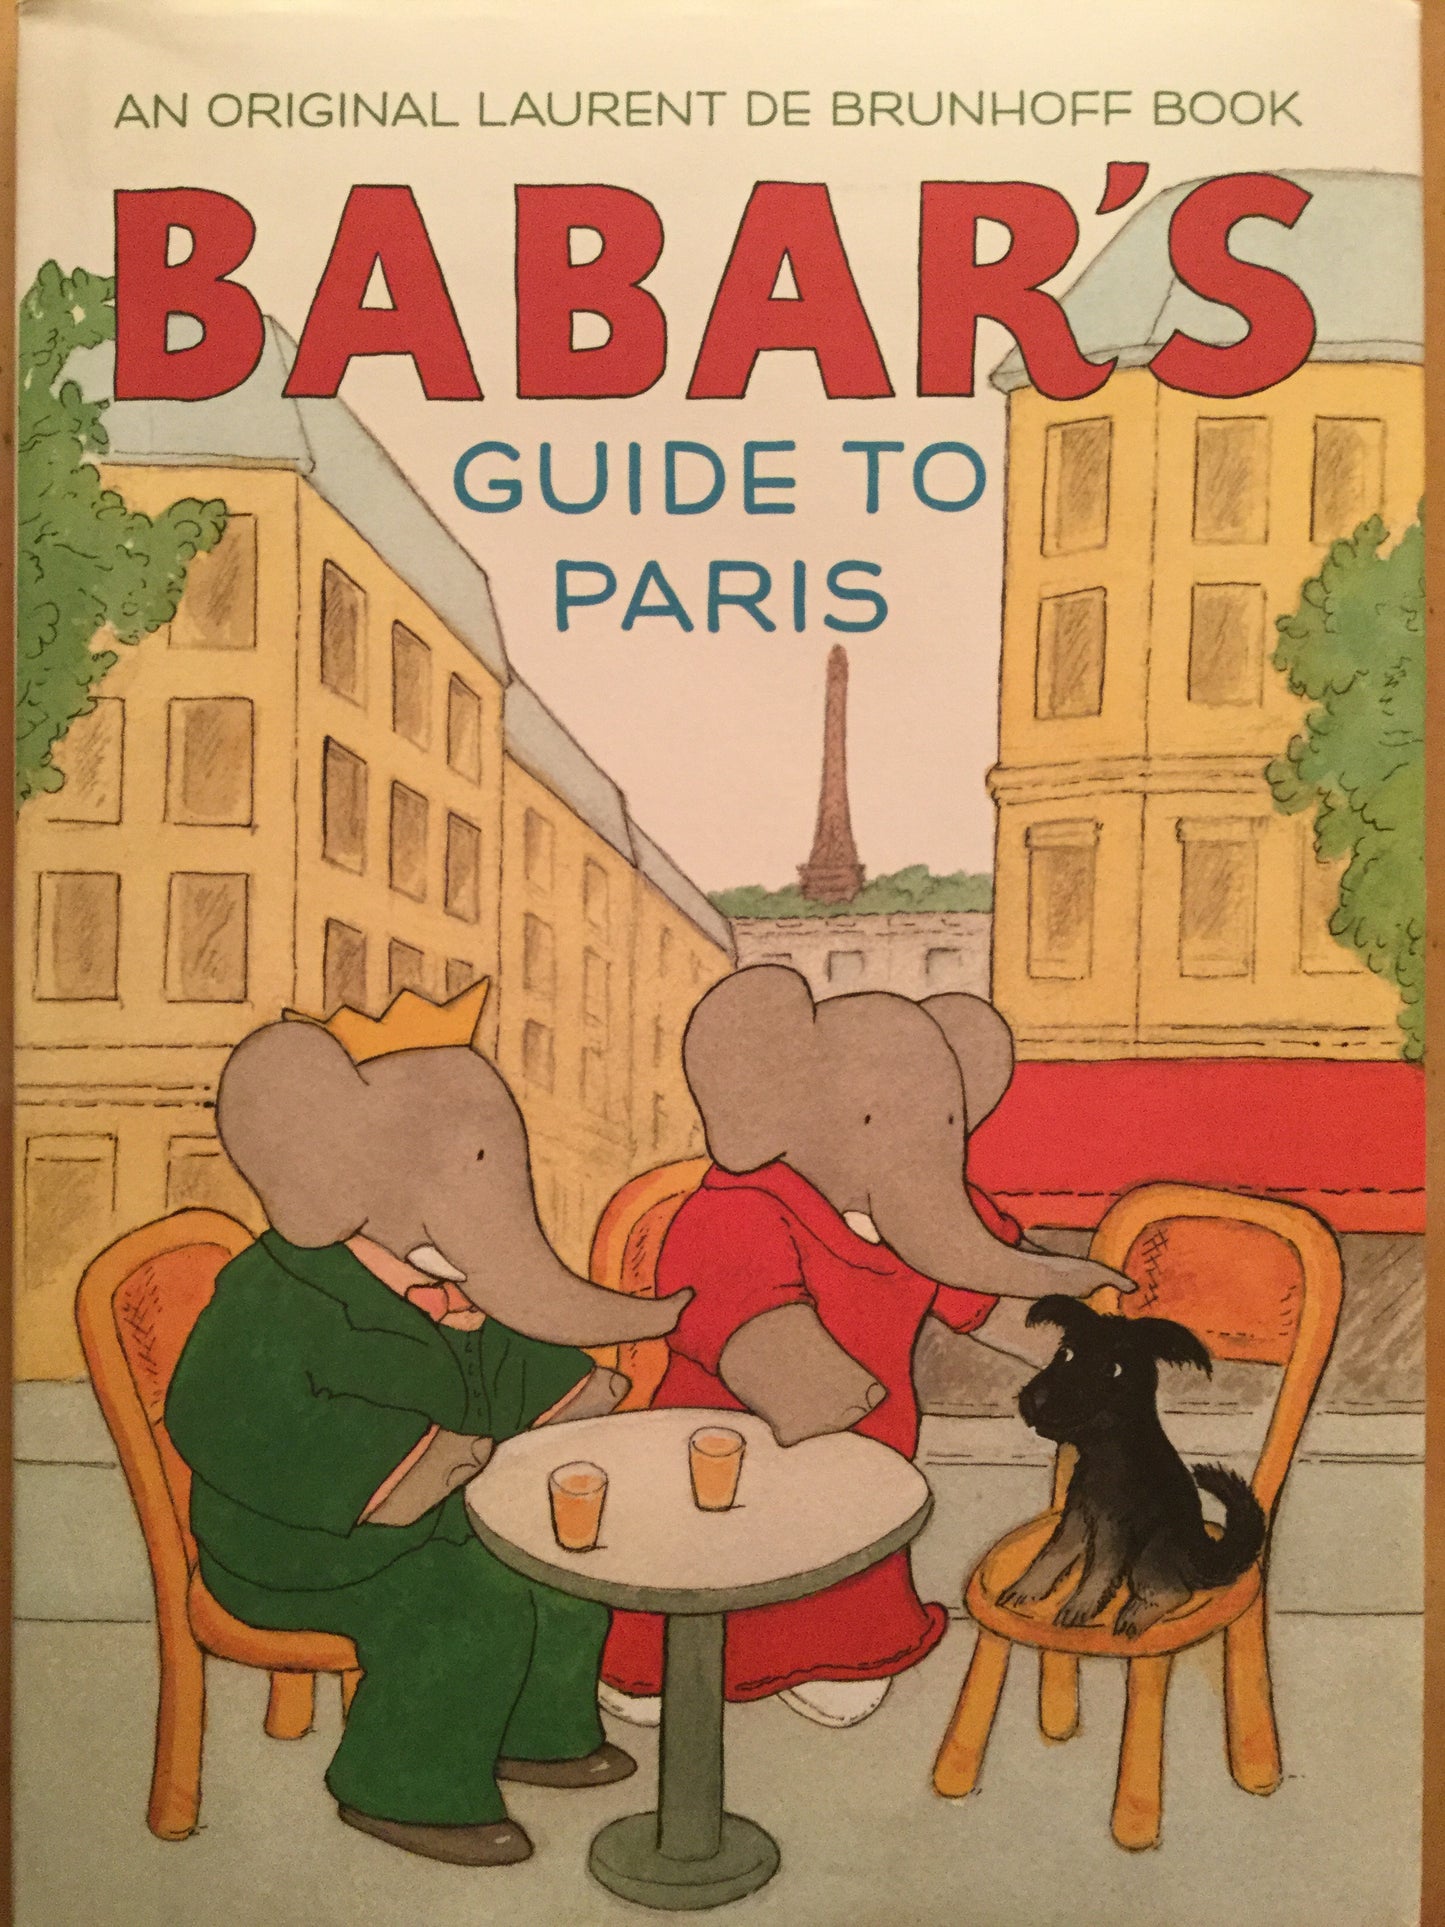 Babar’s Guide To Paris